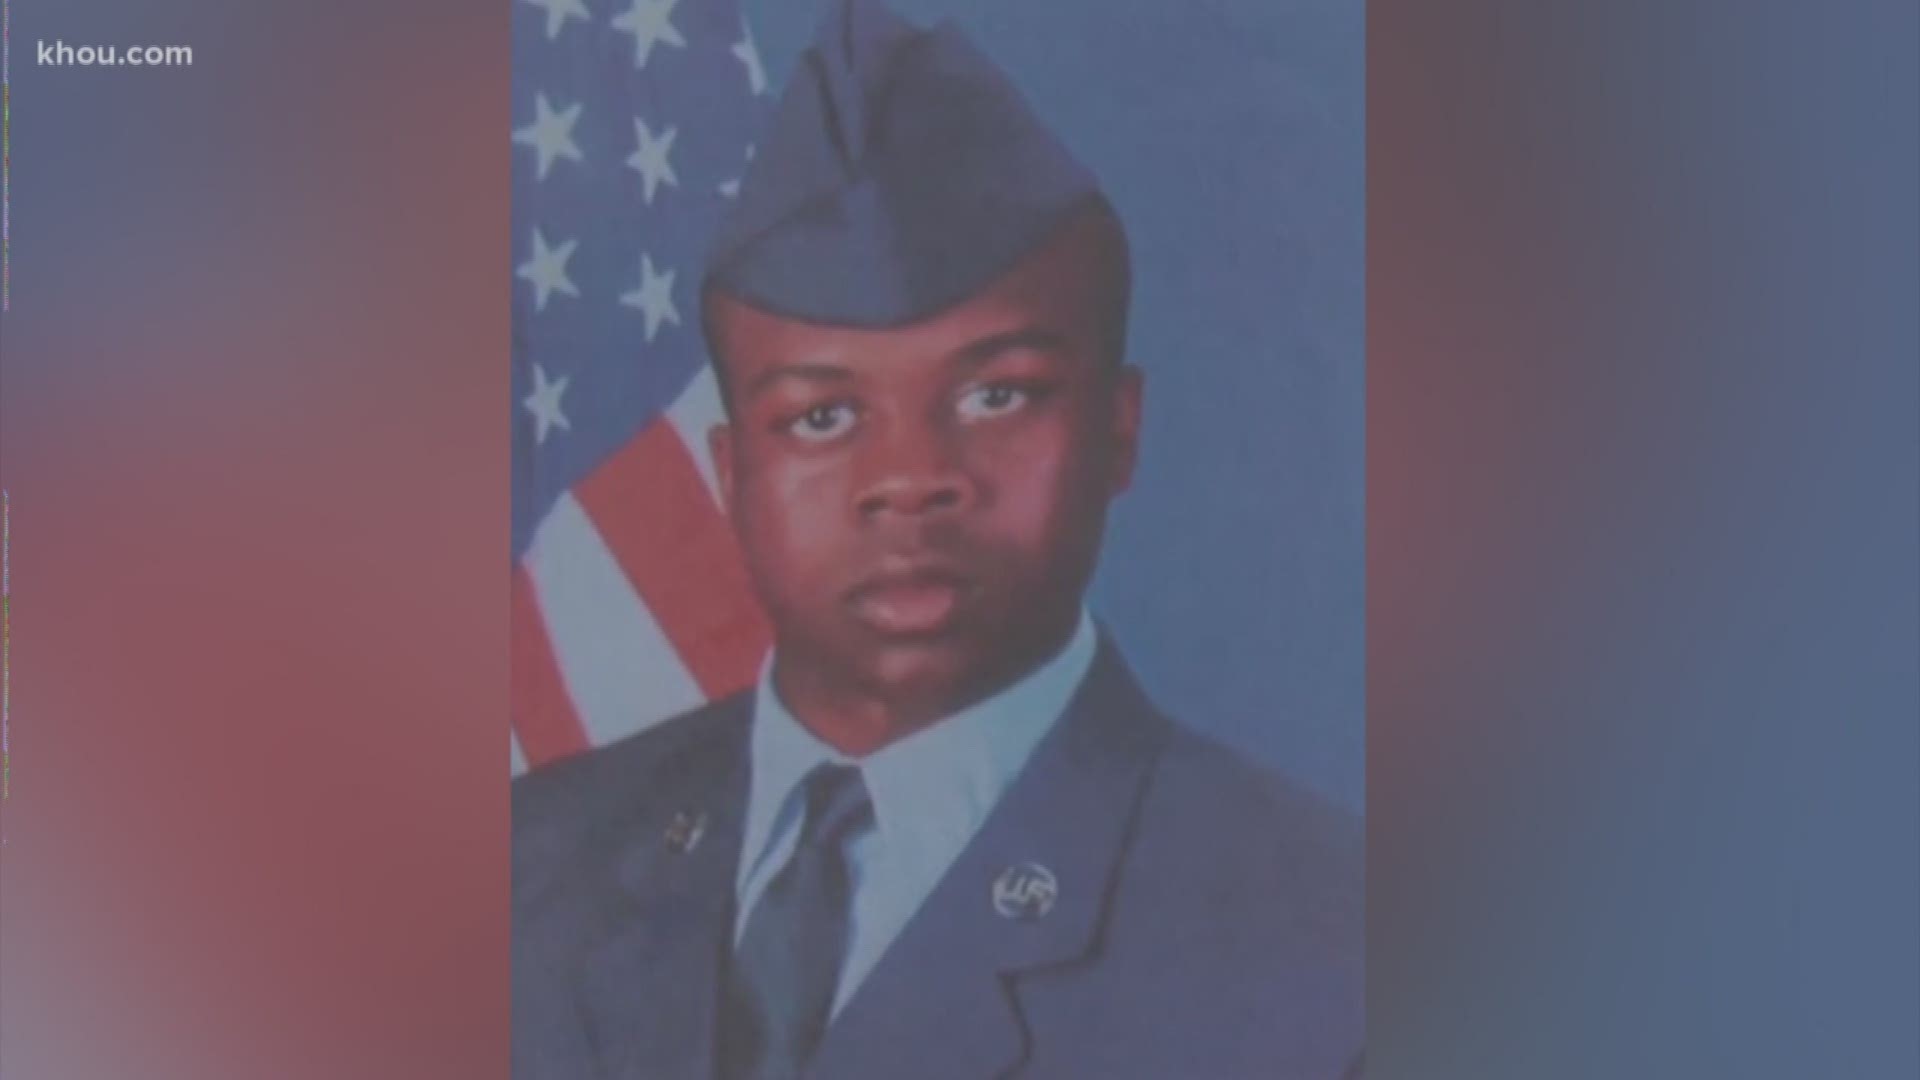 The family of a missing veteran is hoping to find him in time for his son's first Christmas. Jared Chavis disappeared Jan. 12. He was last seen on Westheimer near Fondren. Now, he has a 7-month-old son.